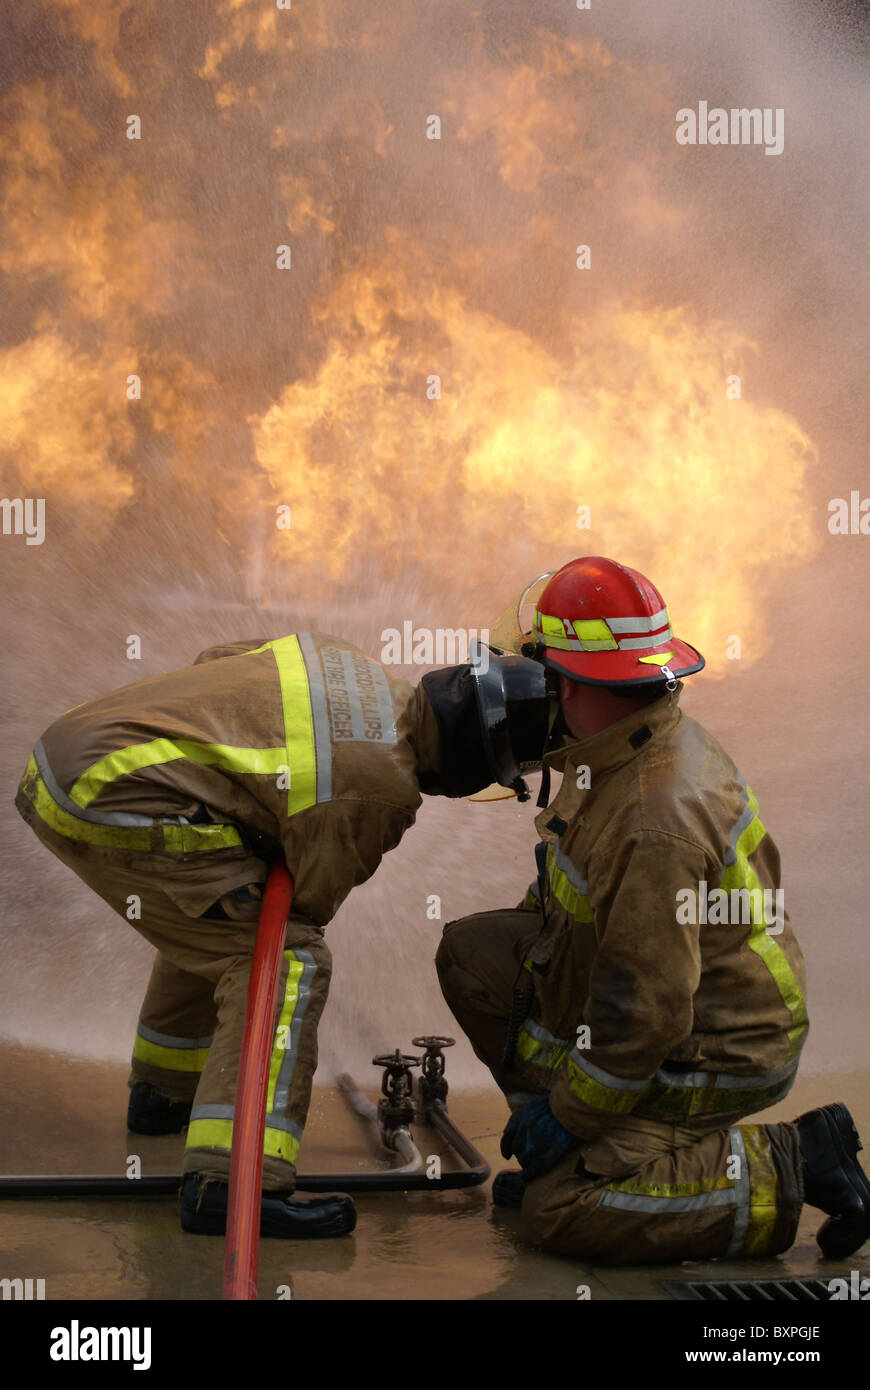 fire-fighters fighting building fire, inferno Stock Photo